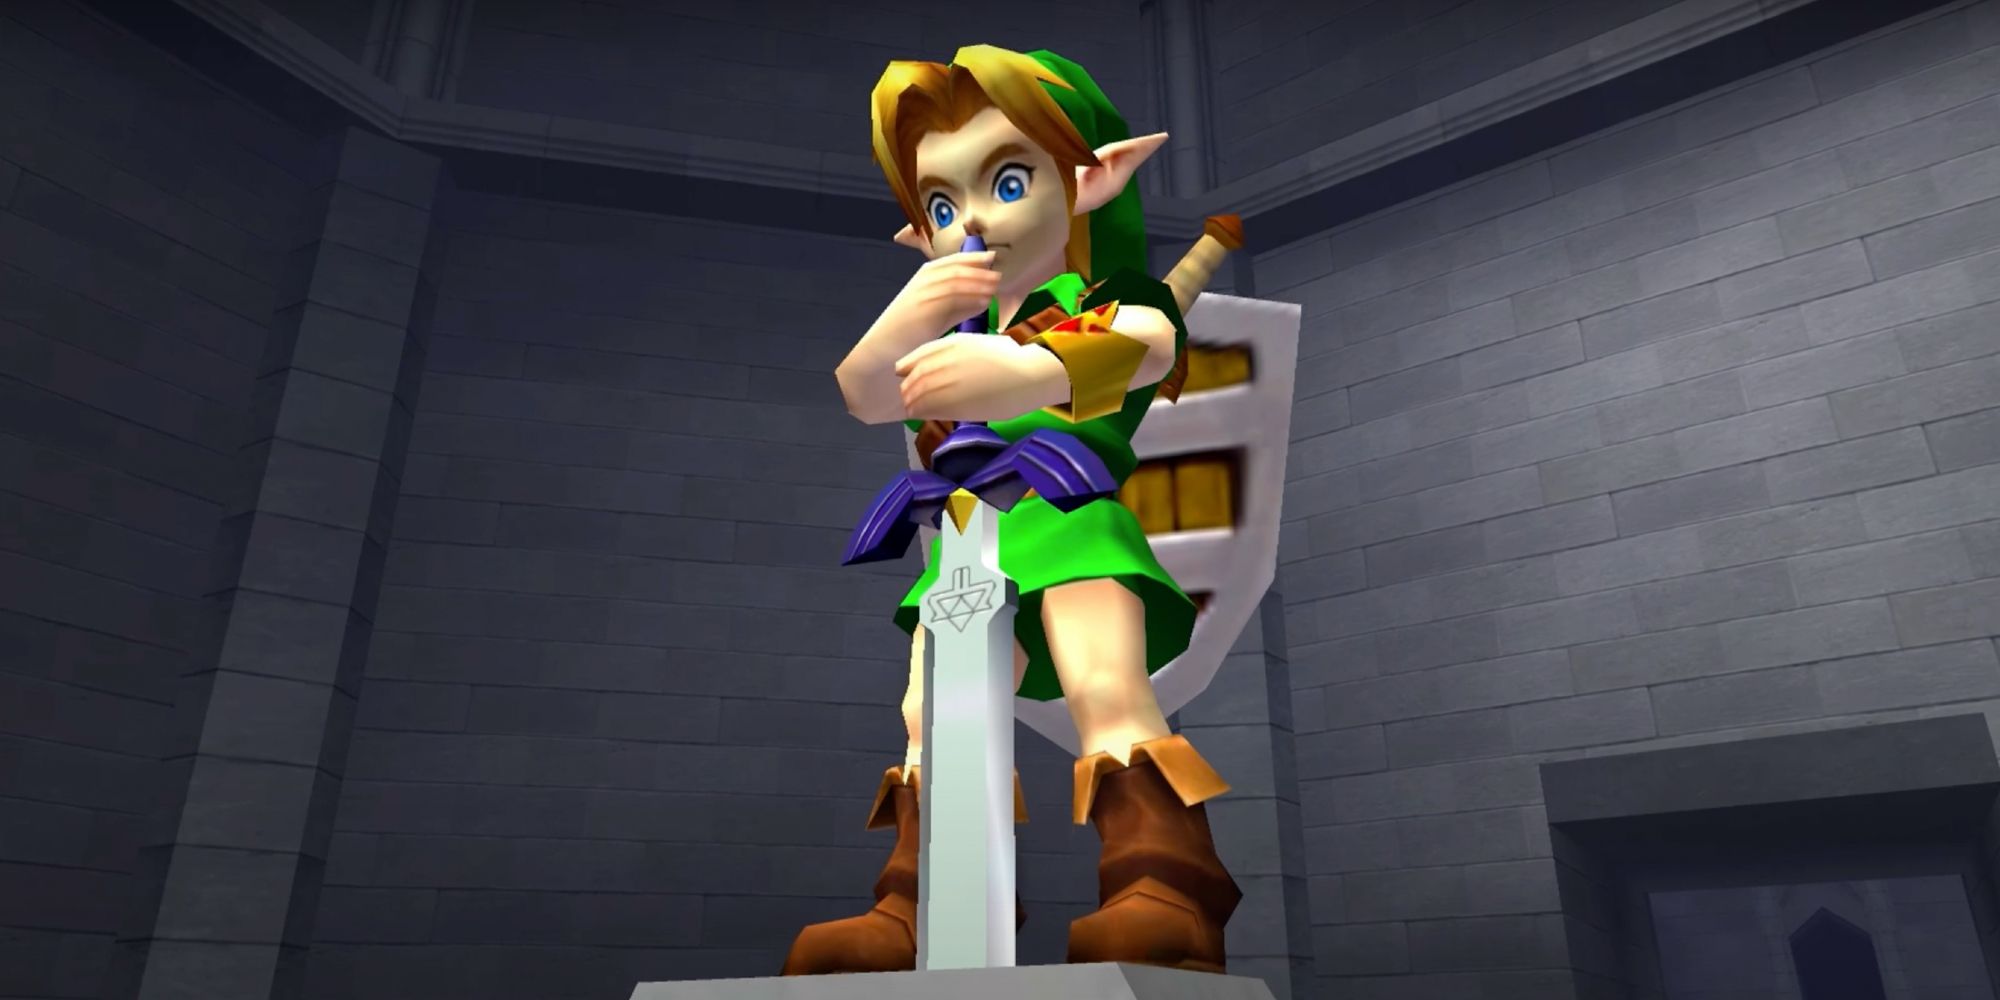 The Master Sword has the power to take Link through time in Ocarina of Time